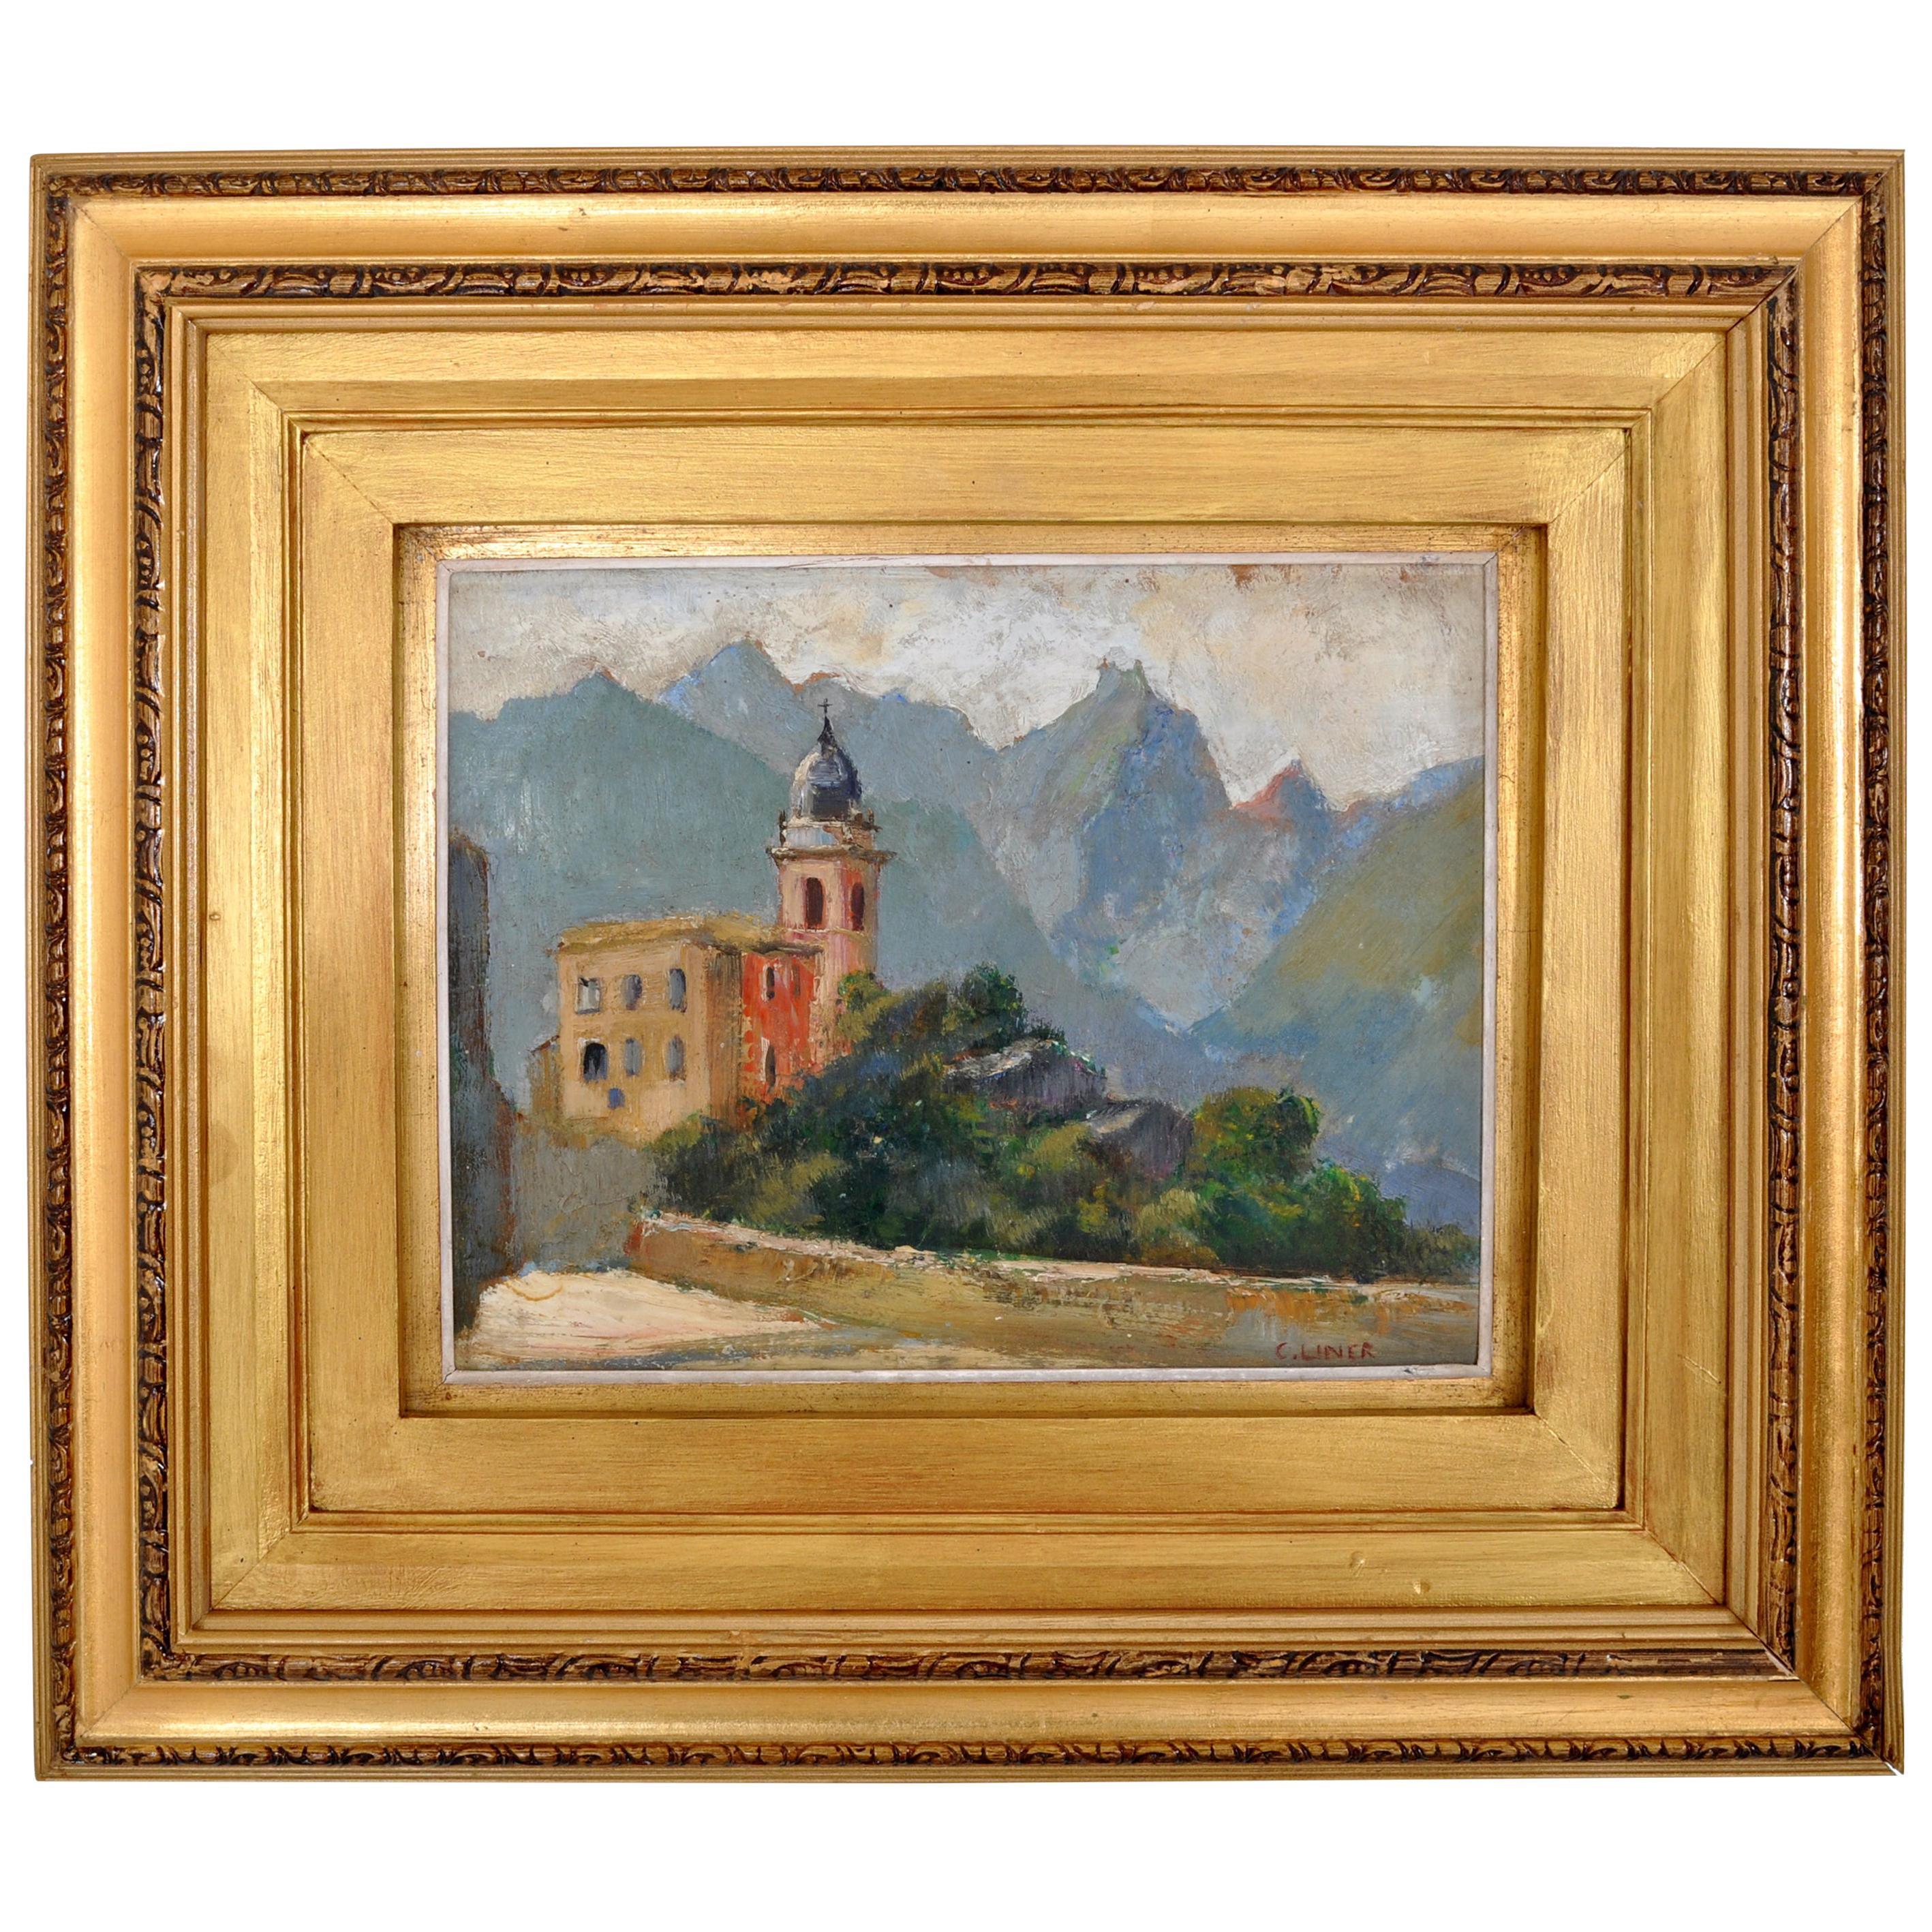 Oil on Panel by Swiss Impressionist Carl August Liner, circa 1900